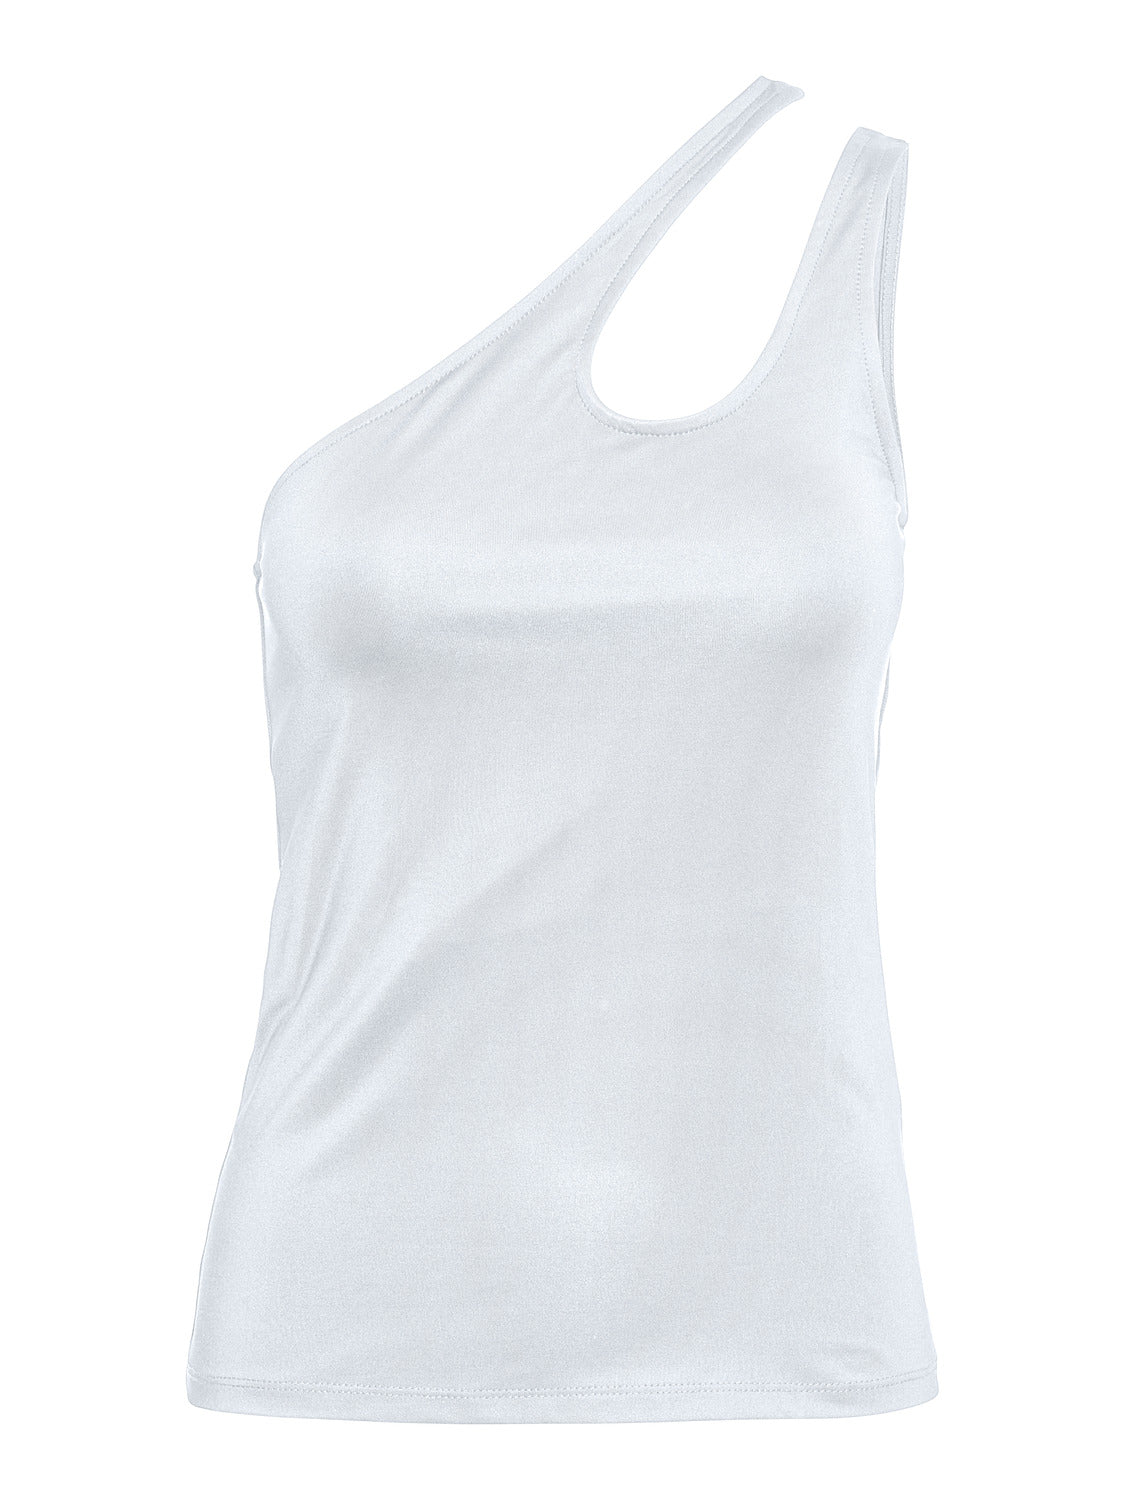 VMBIANCA T-Shirts & Tops - Bright White